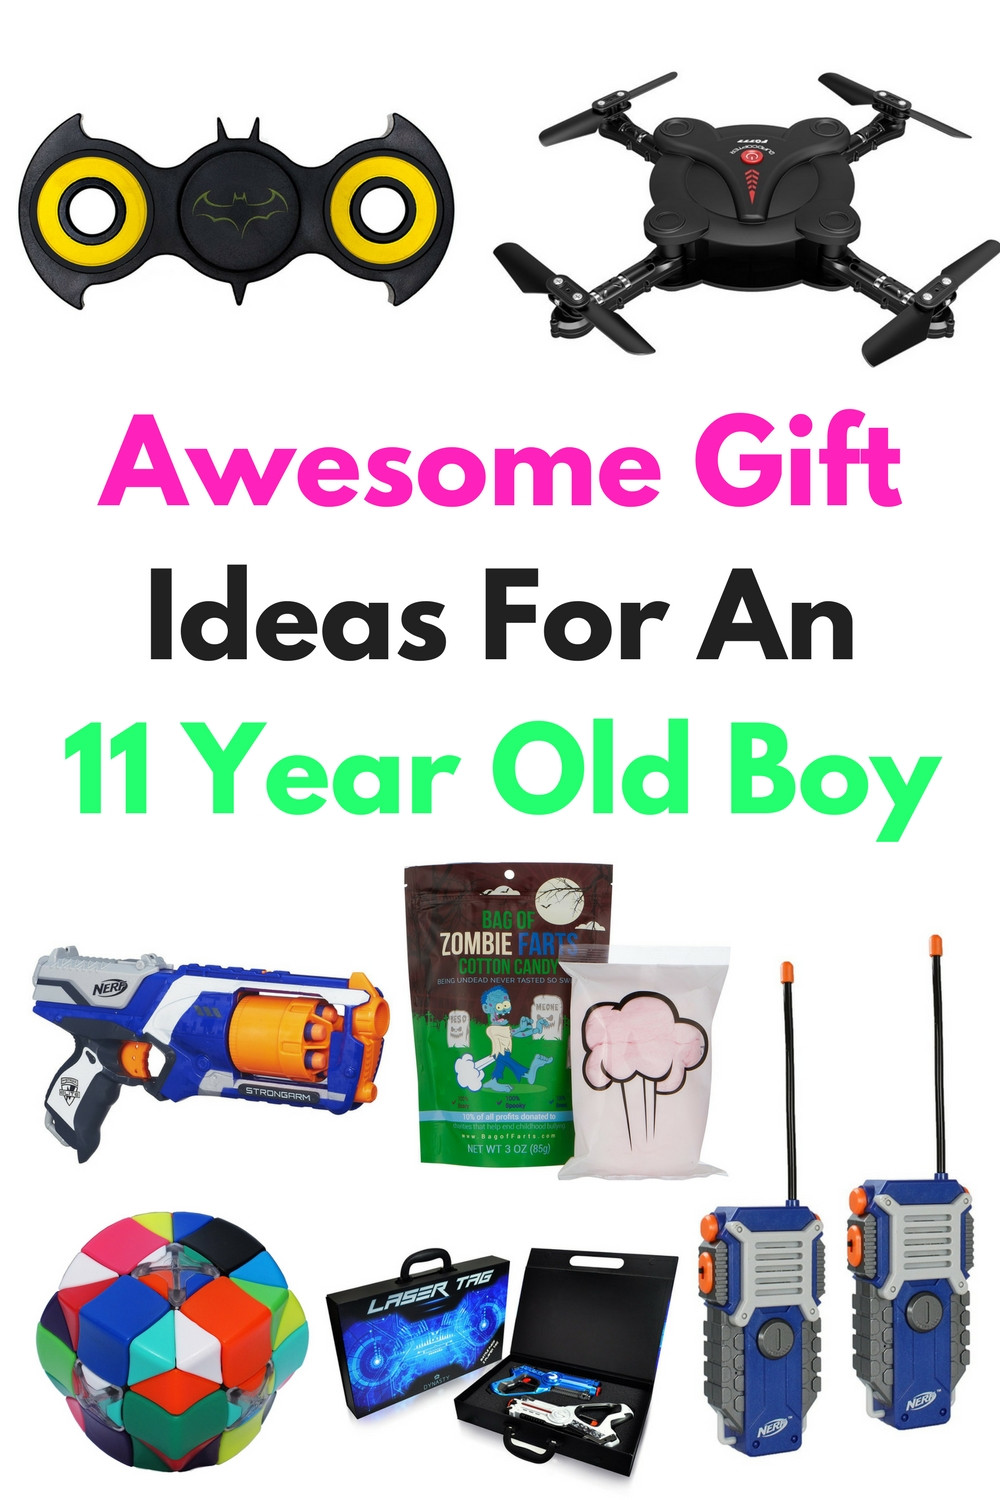 Gift Ideas For Boys
 Awesome Gift Ideas For An 11 Year Old Boy